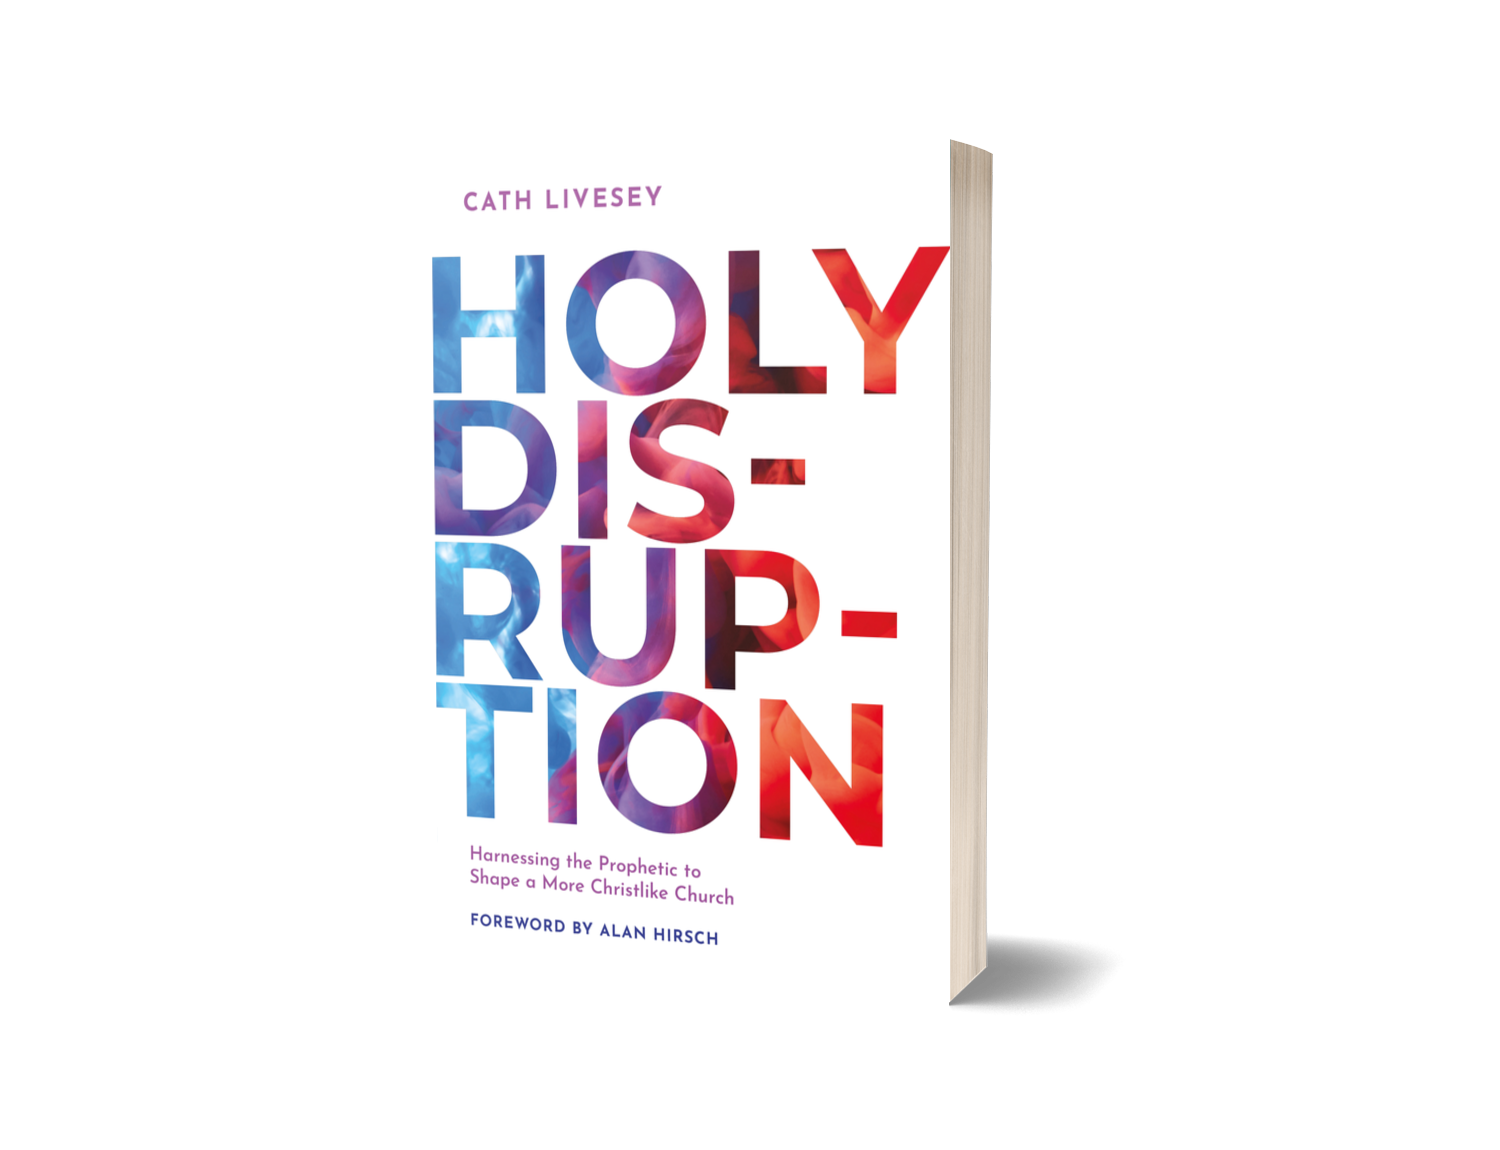 The cover art of the physical copy of Holy Disruption by Cath Livesey